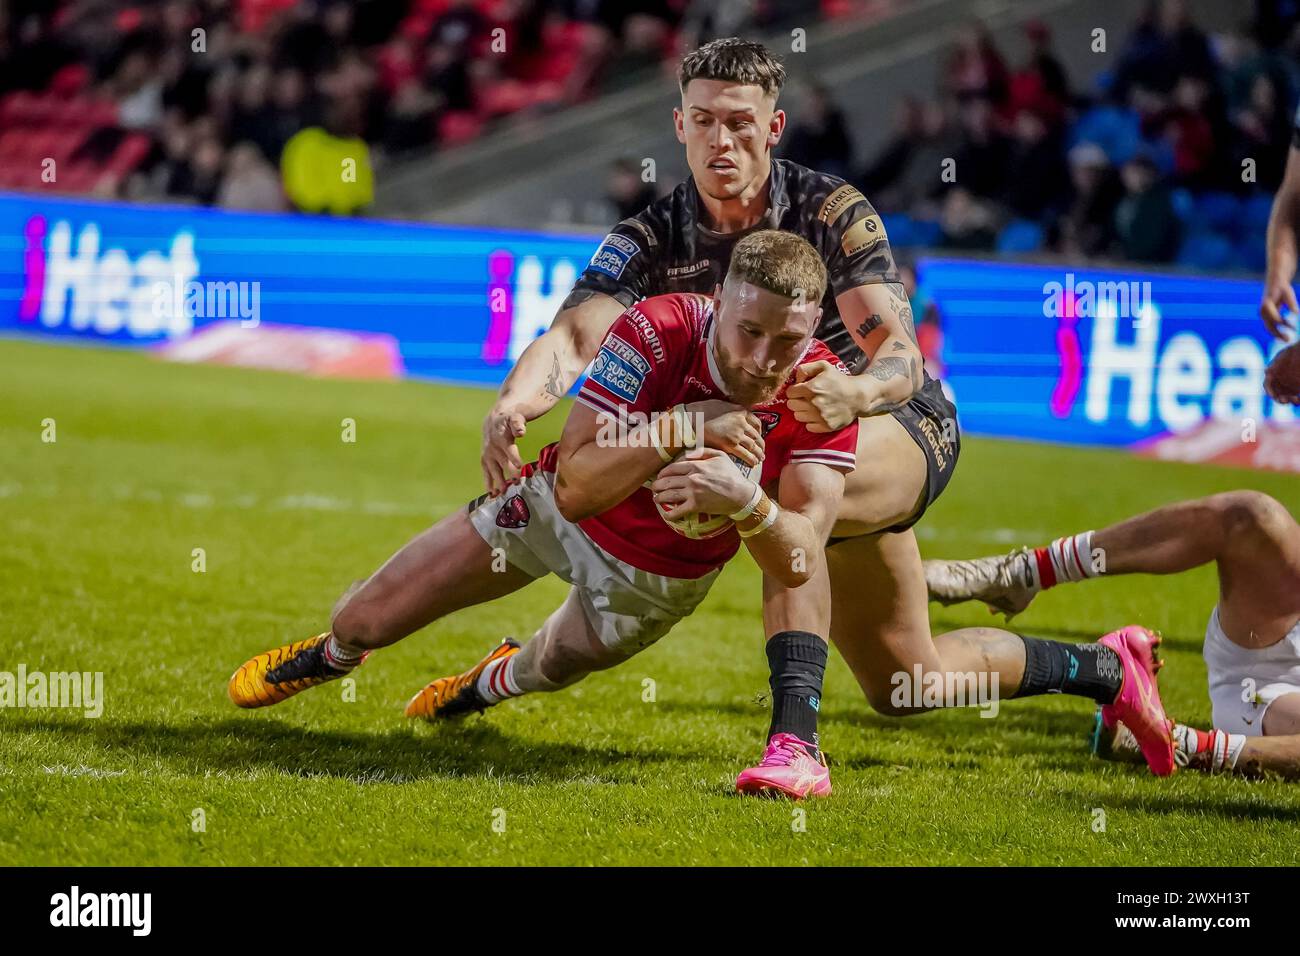 Salford, Manchester, UK. 30th March, 2024. Super League Rugby: Salford Red Devils Vs Leigh Leopards at Salford Community Stadium. ETHAN RYAN beating the Leigh defender to score. Credit James Giblin/Alamy Live News. Stock Photo